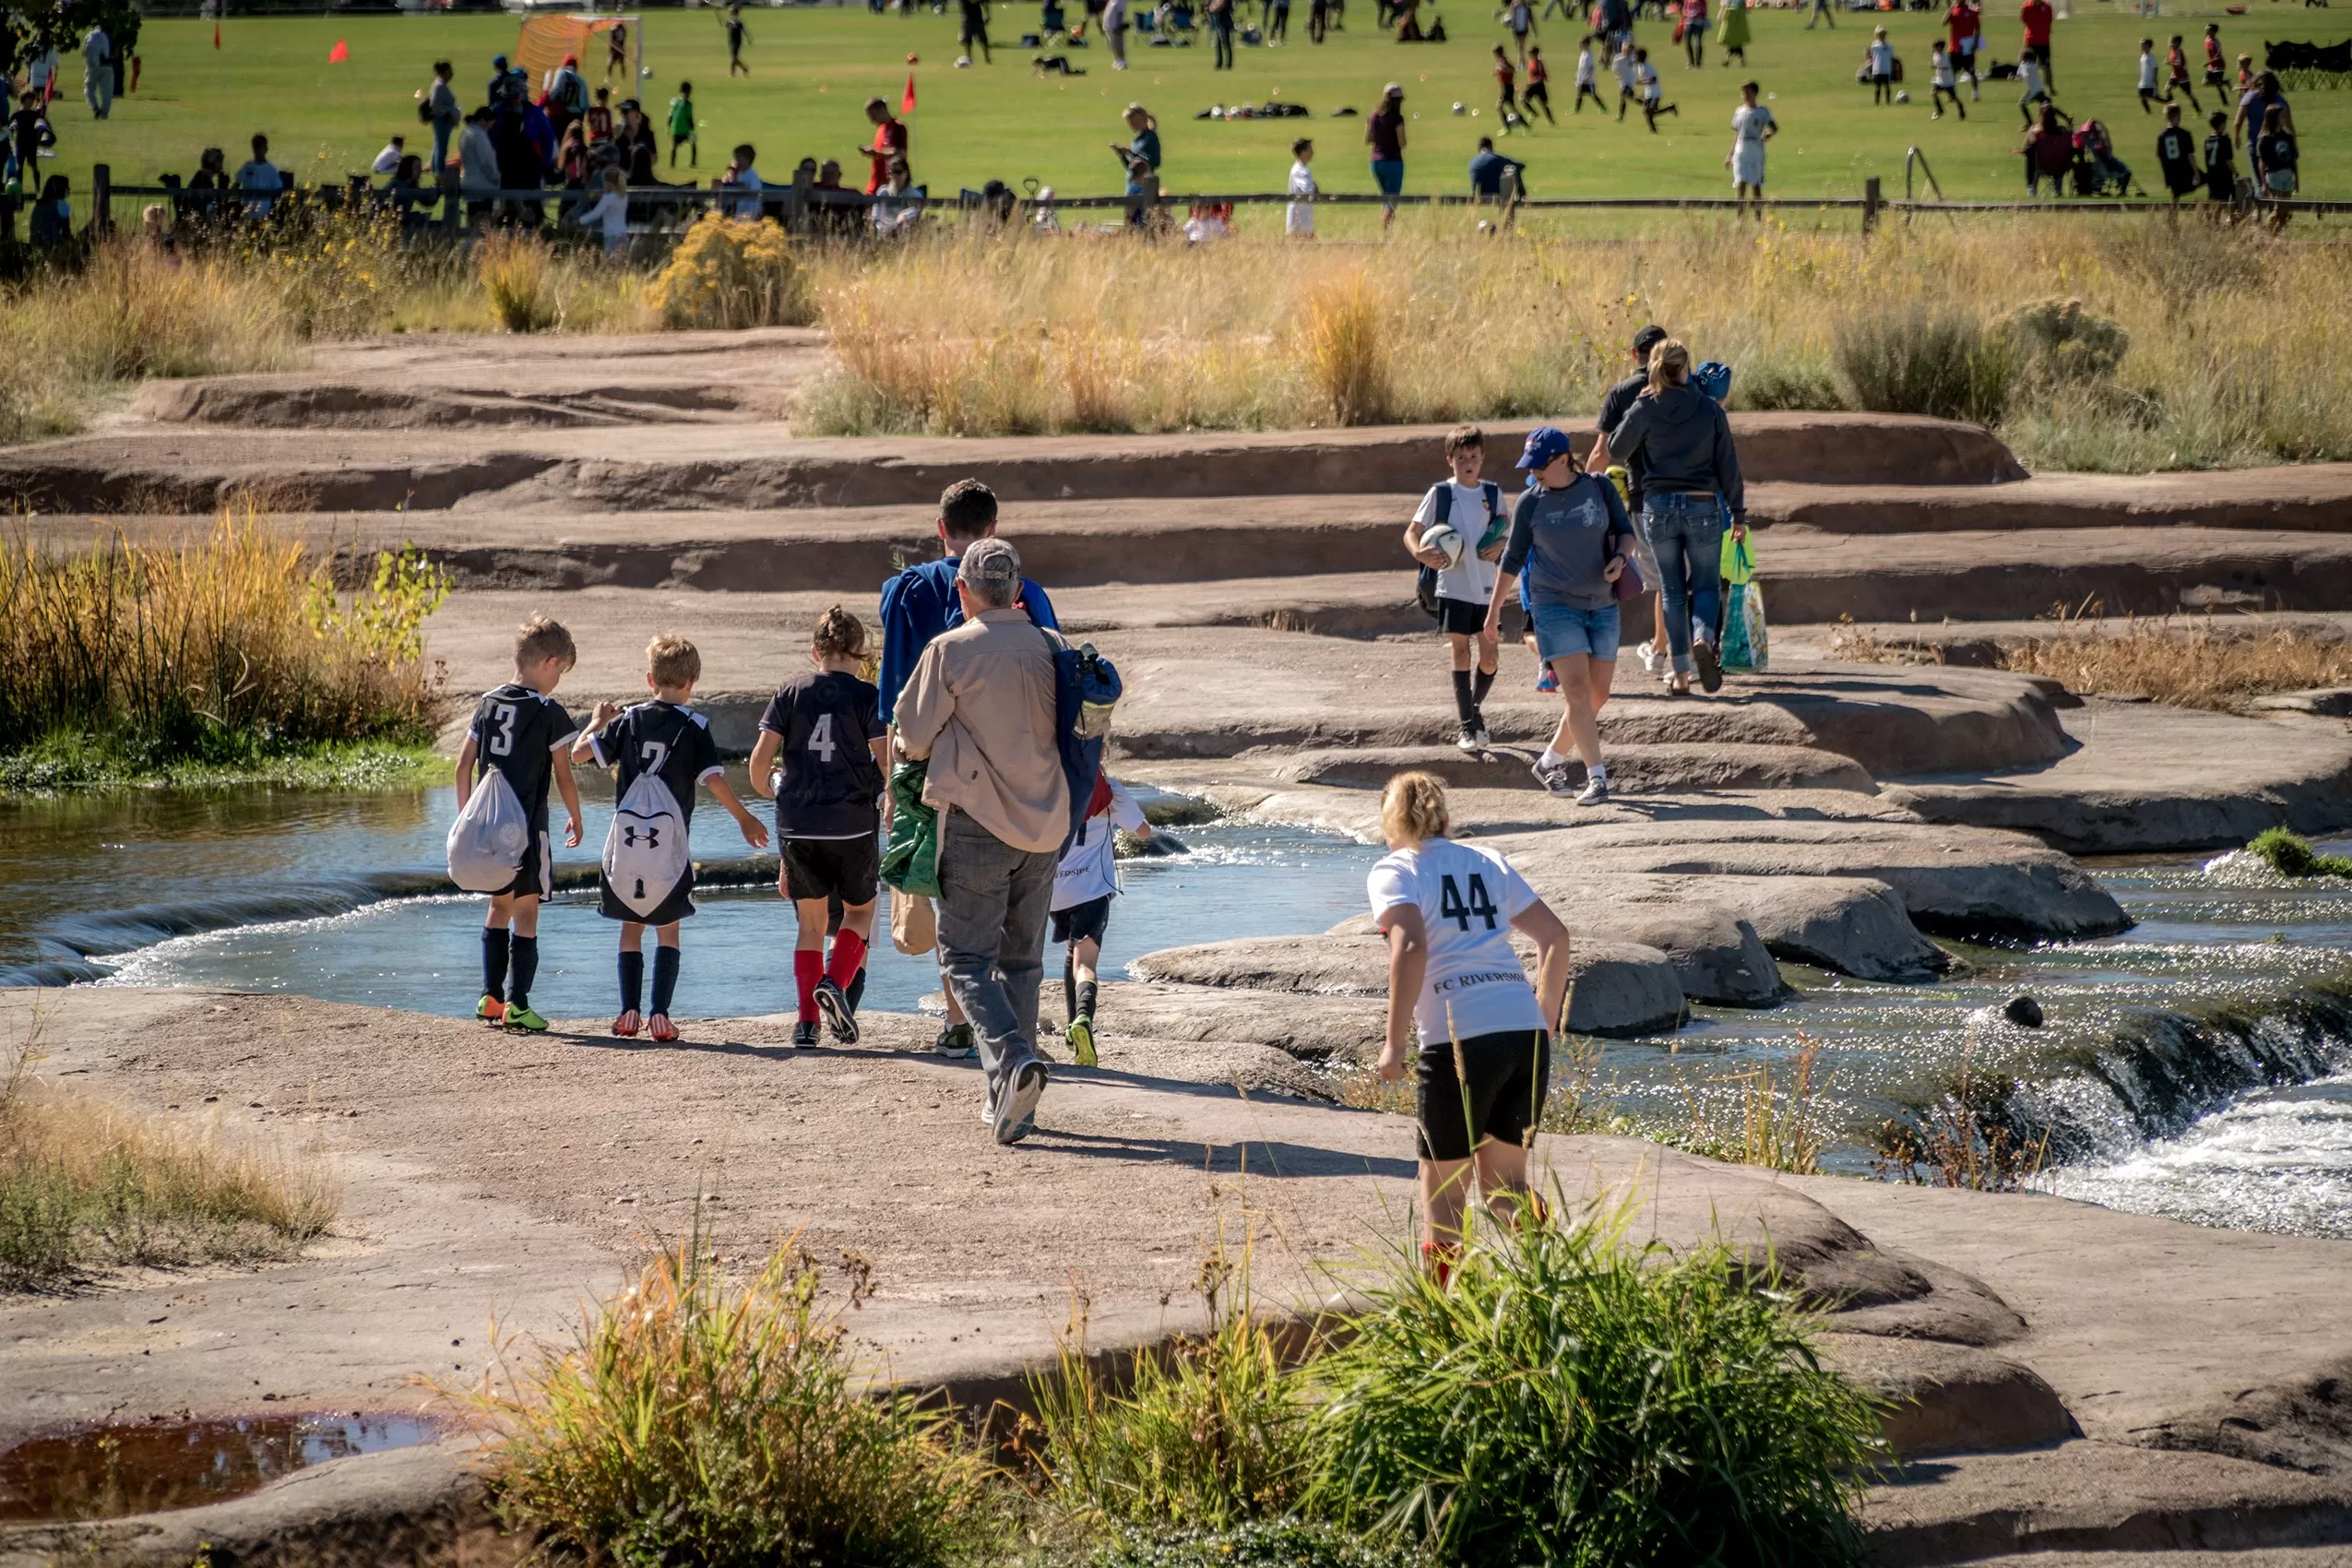 Adults and children cross an environmental stepping stone feature over a river